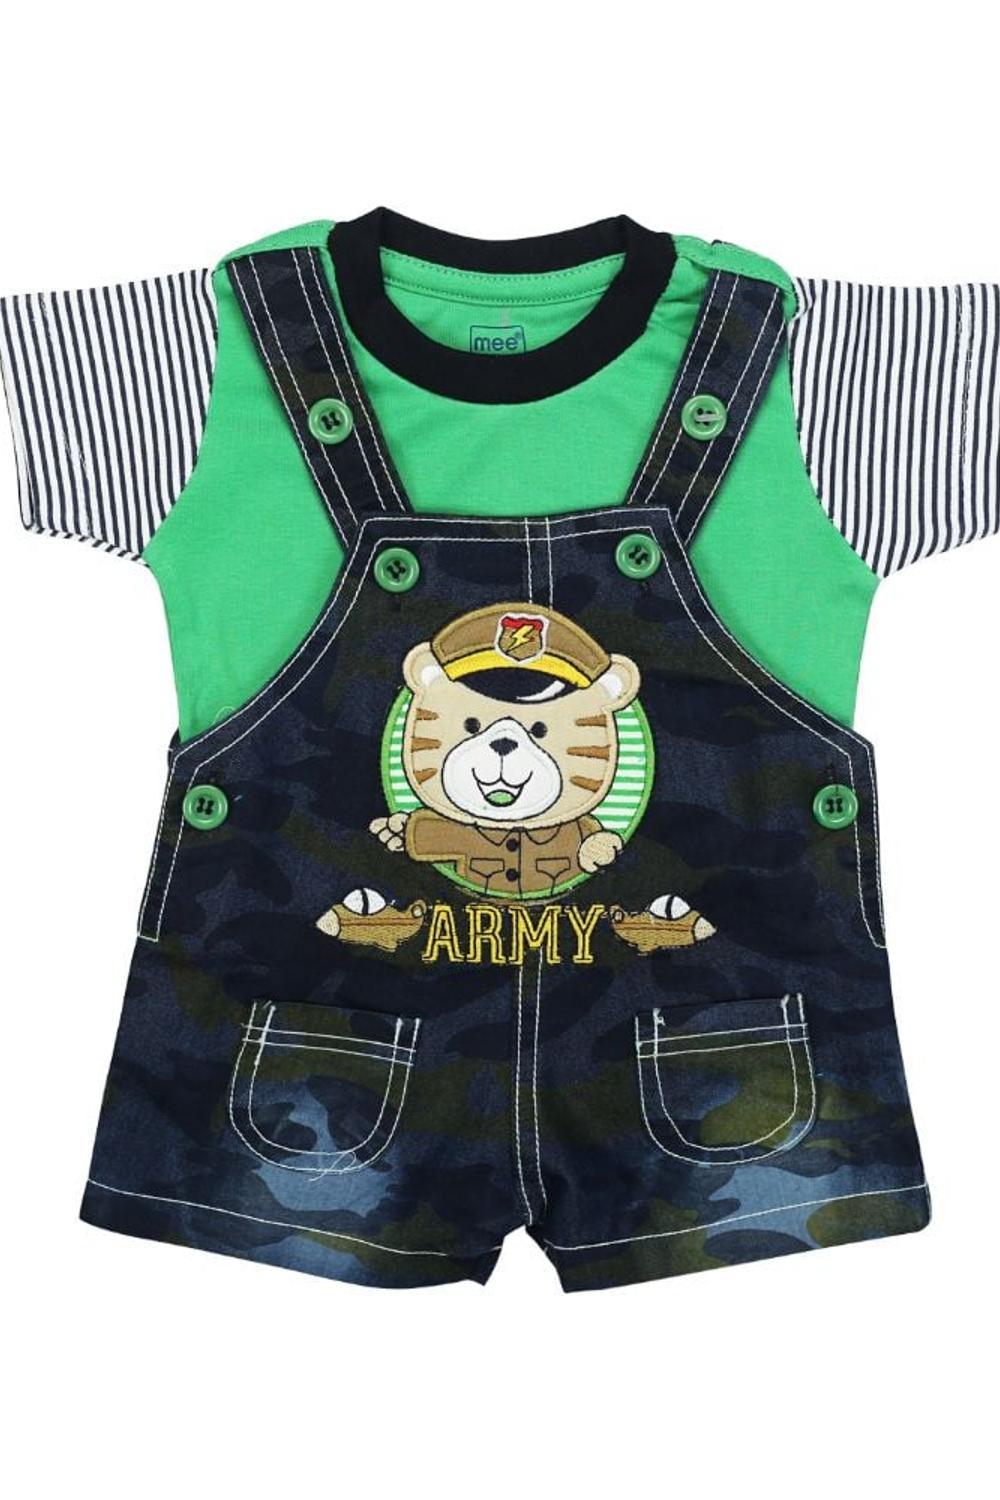 Mee Mee Short Stripped Sleeve Tee Army Camouflage Dungaree Set